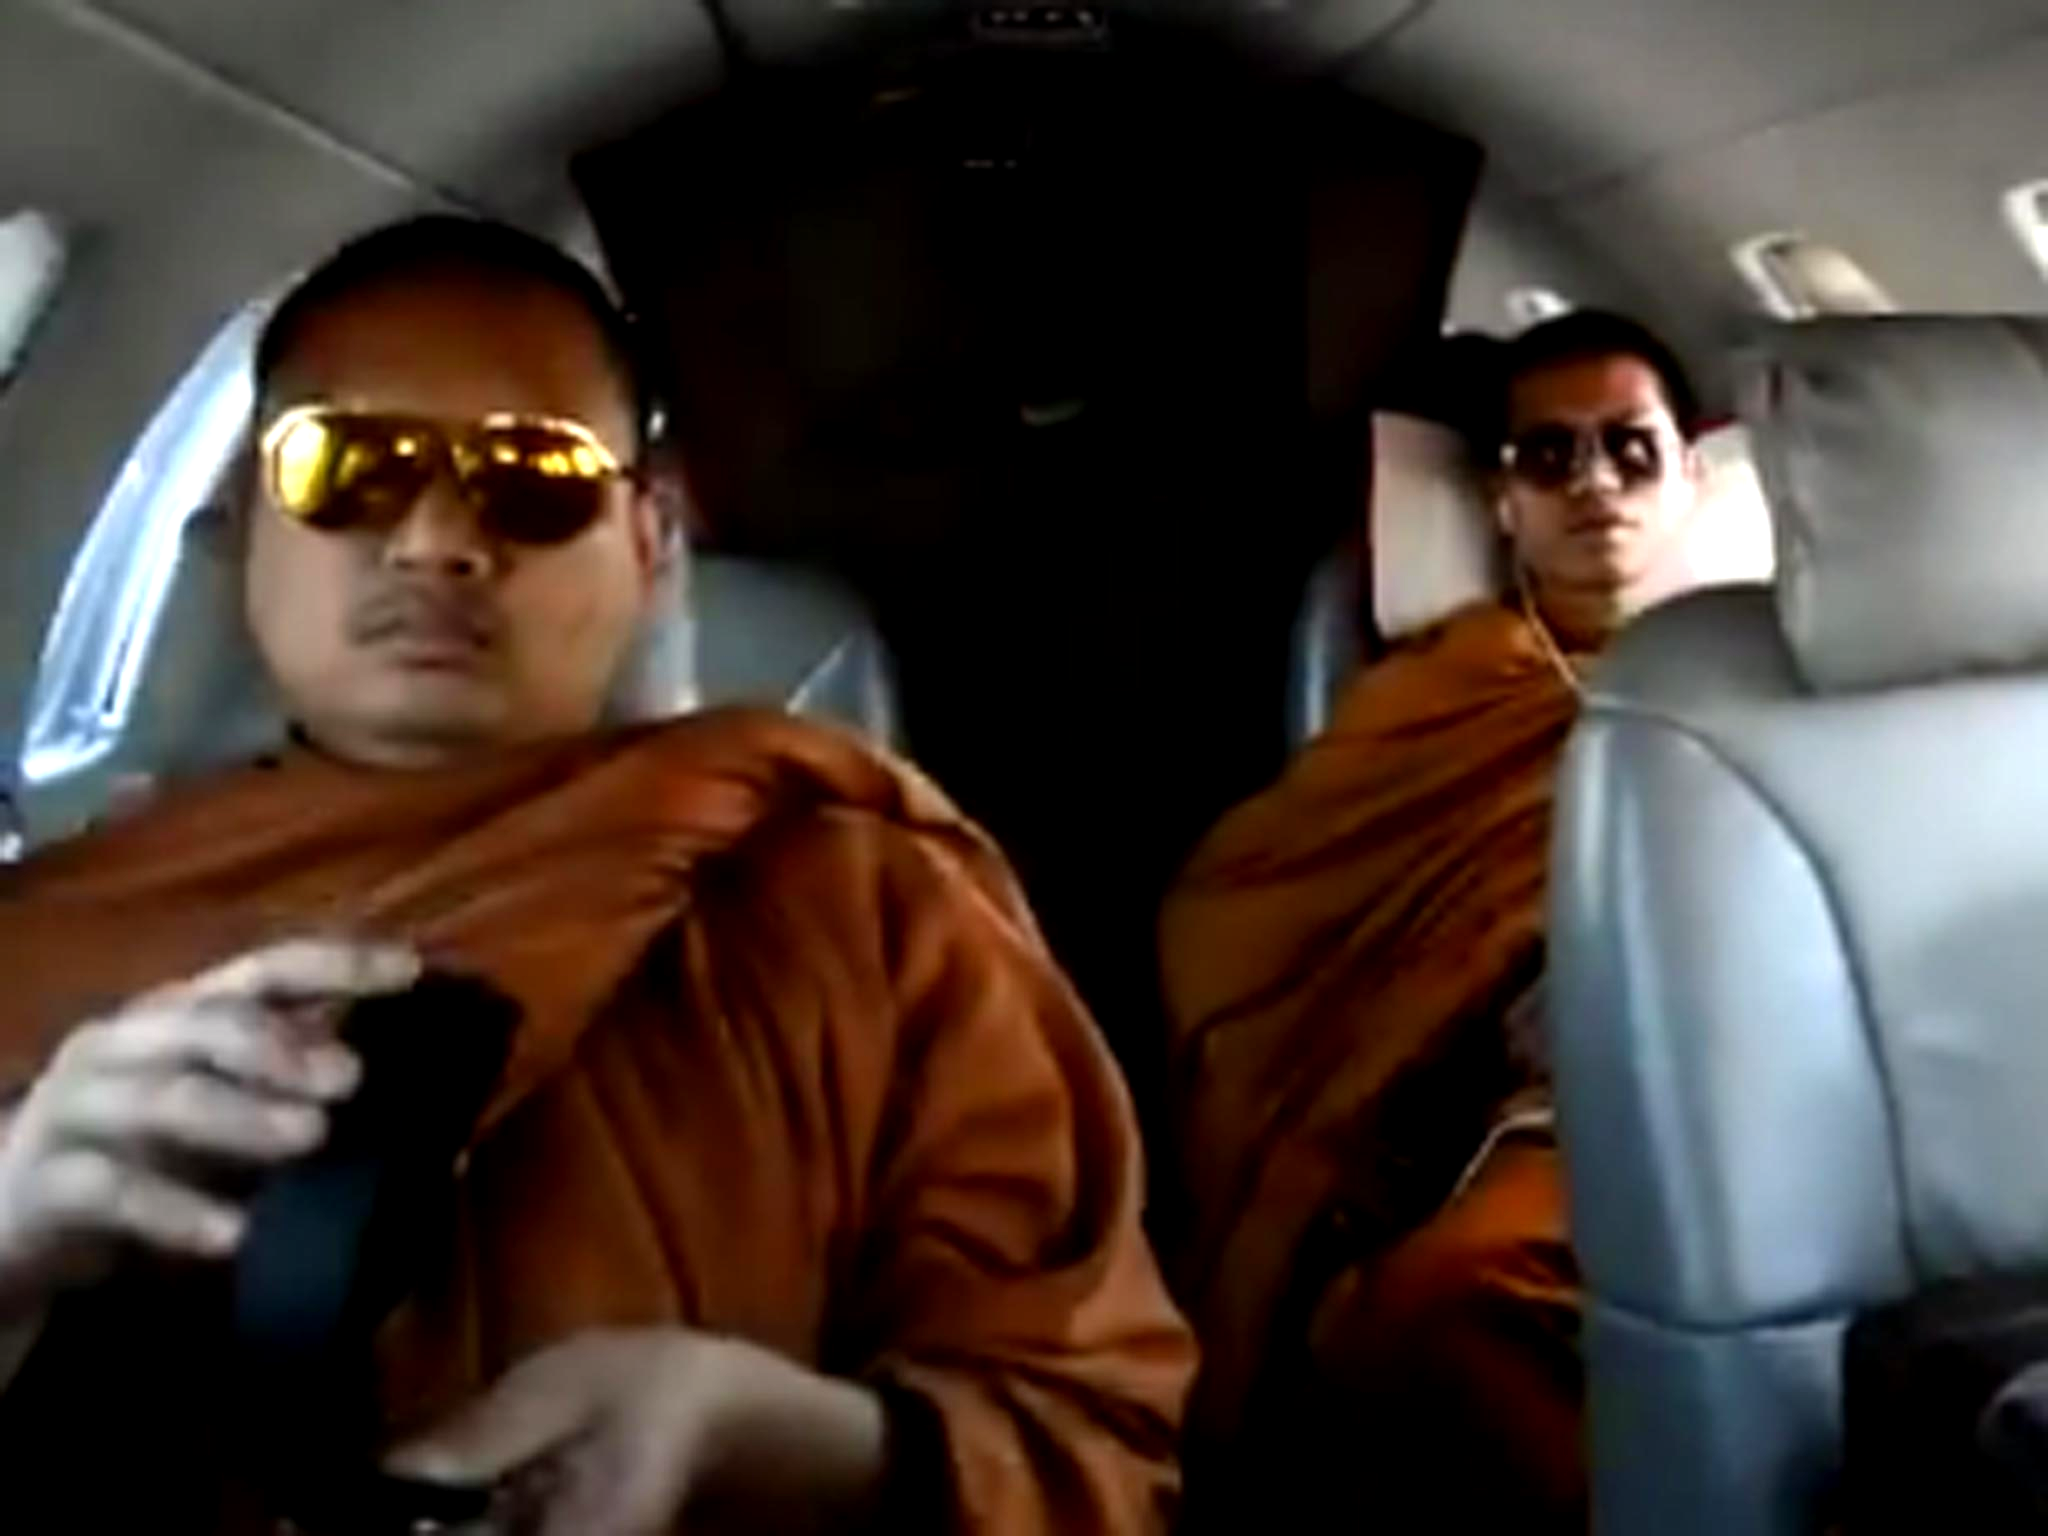 Buddhist Monks Are Having a Louis Vuitton Scandal